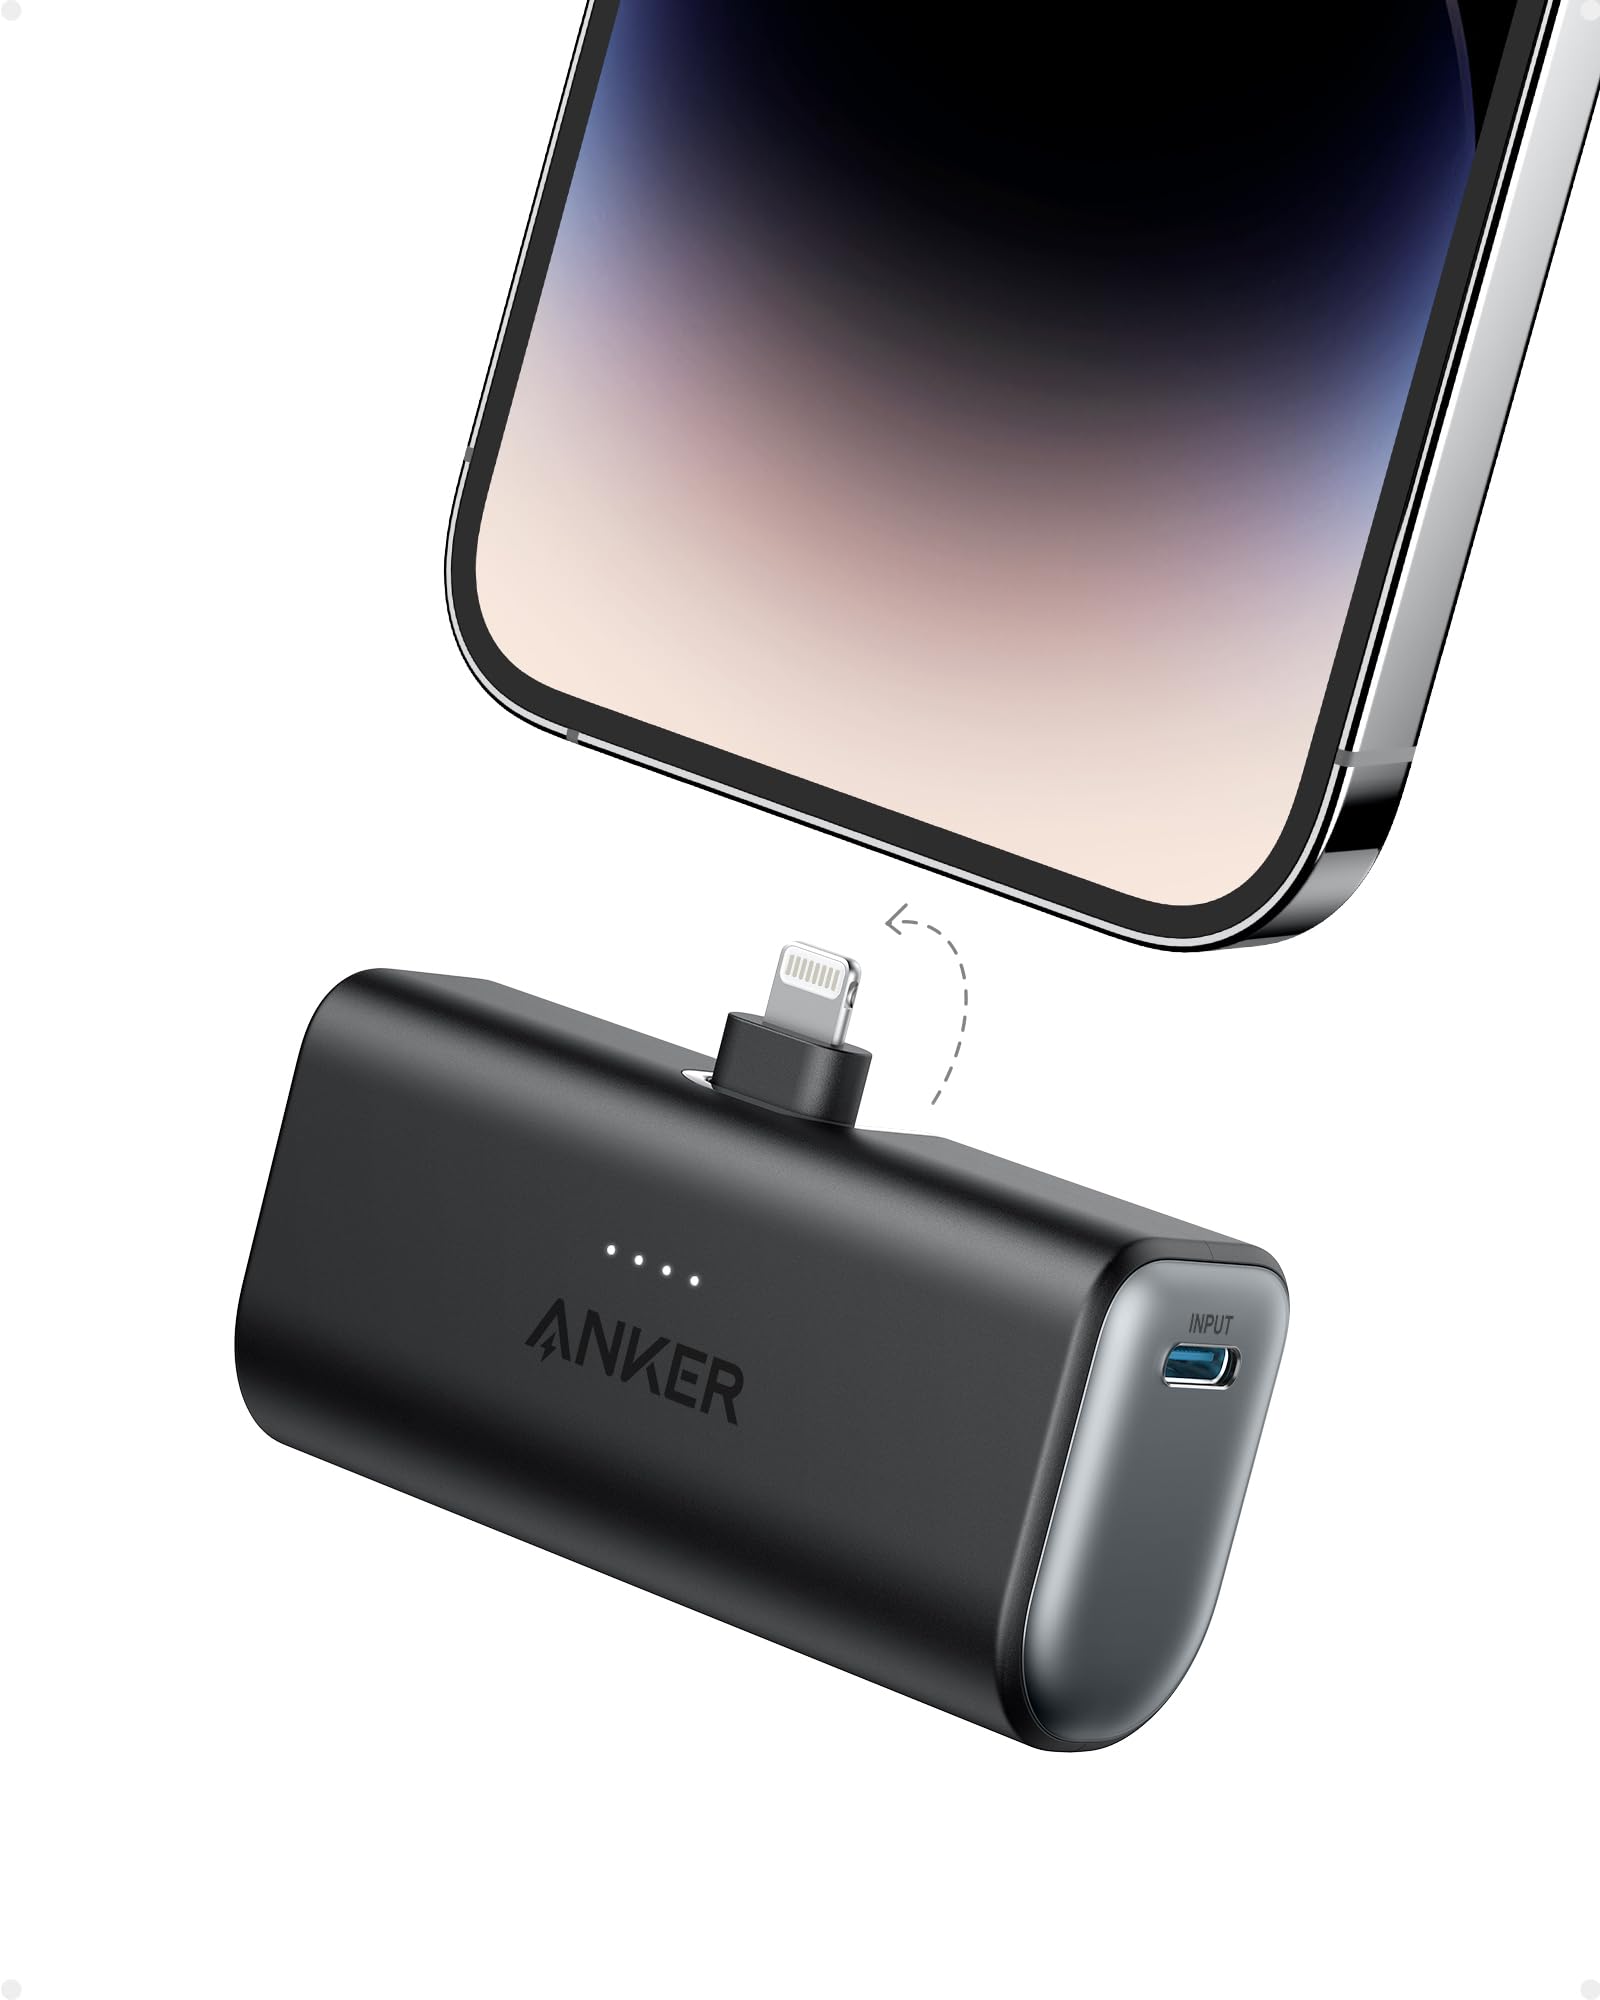 anker portable battery charger